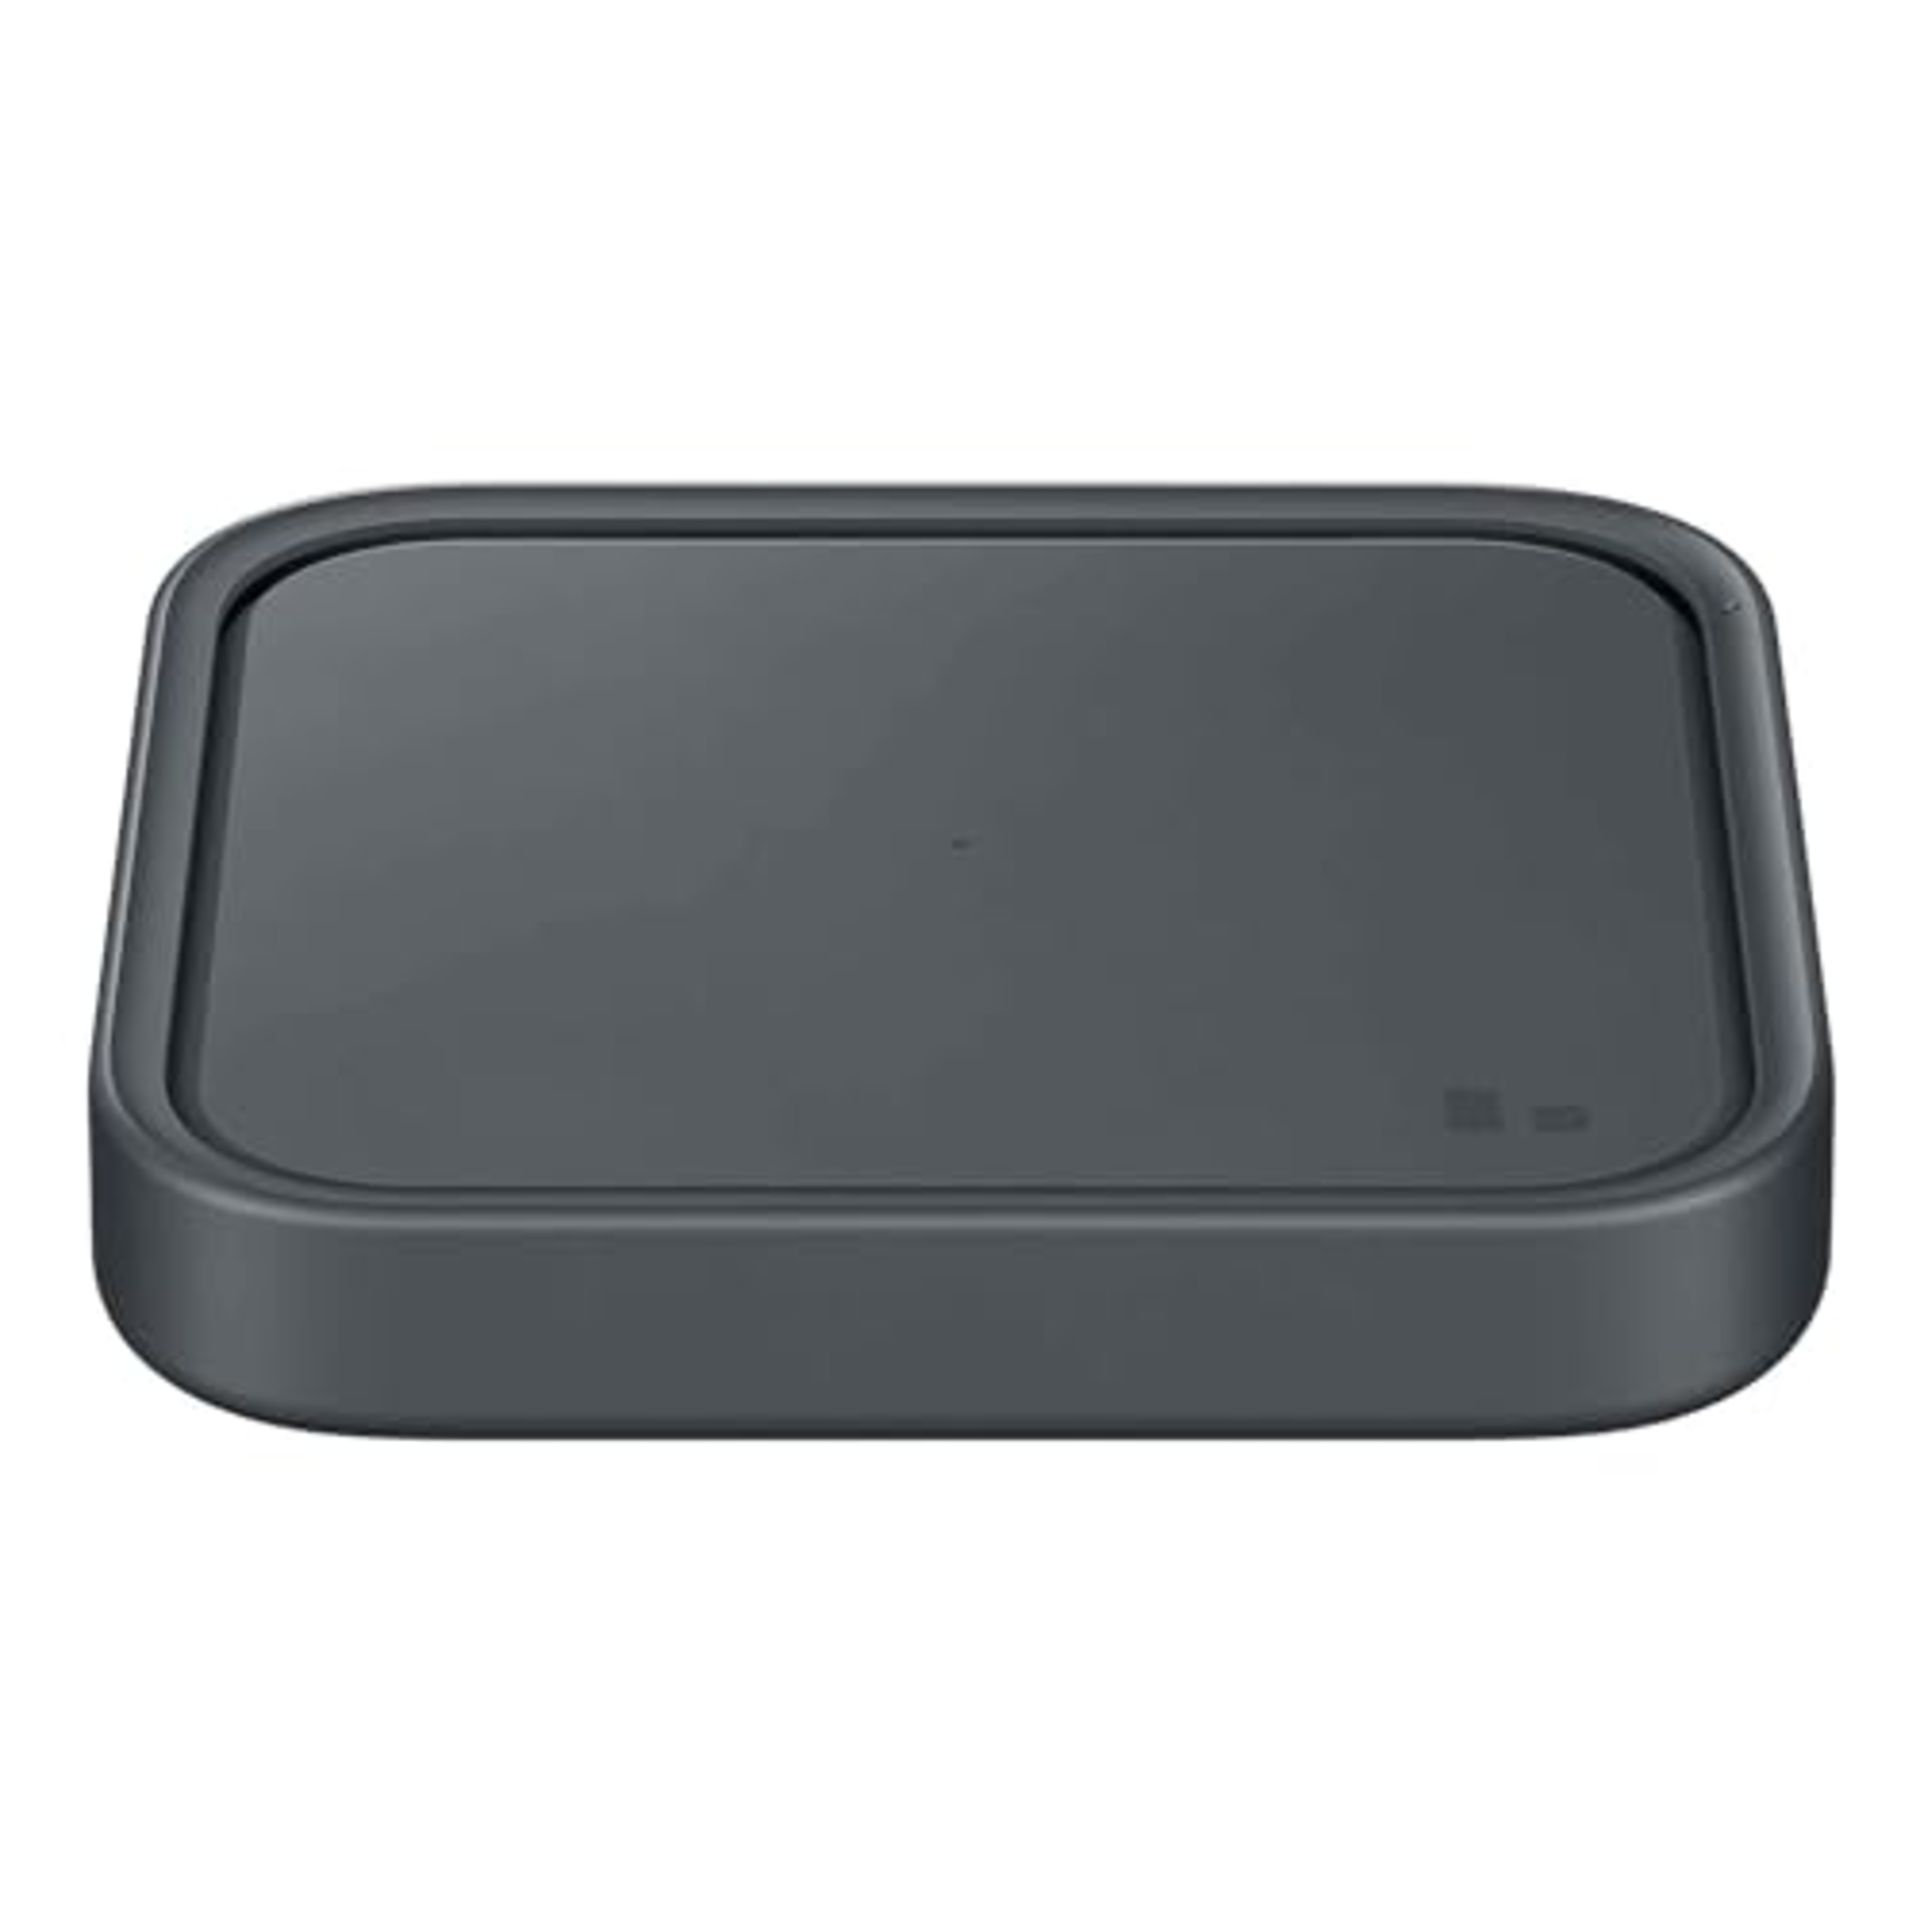 Samsung Galaxy Official Wireless Charging Pad, Black